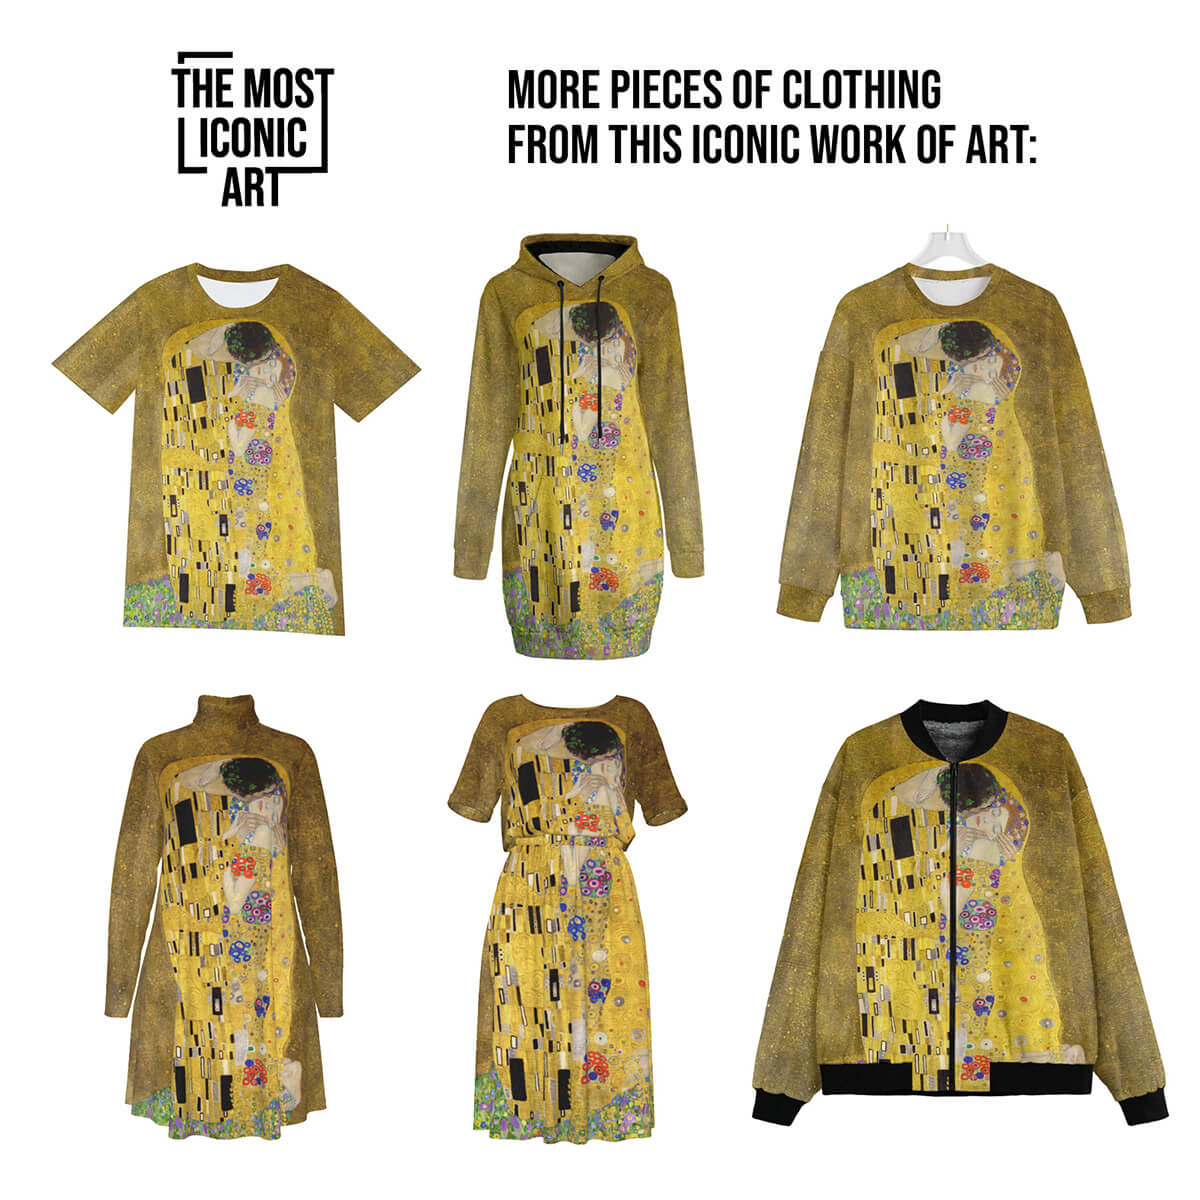 Perfect for art enthusiasts and fashion-forward individuals